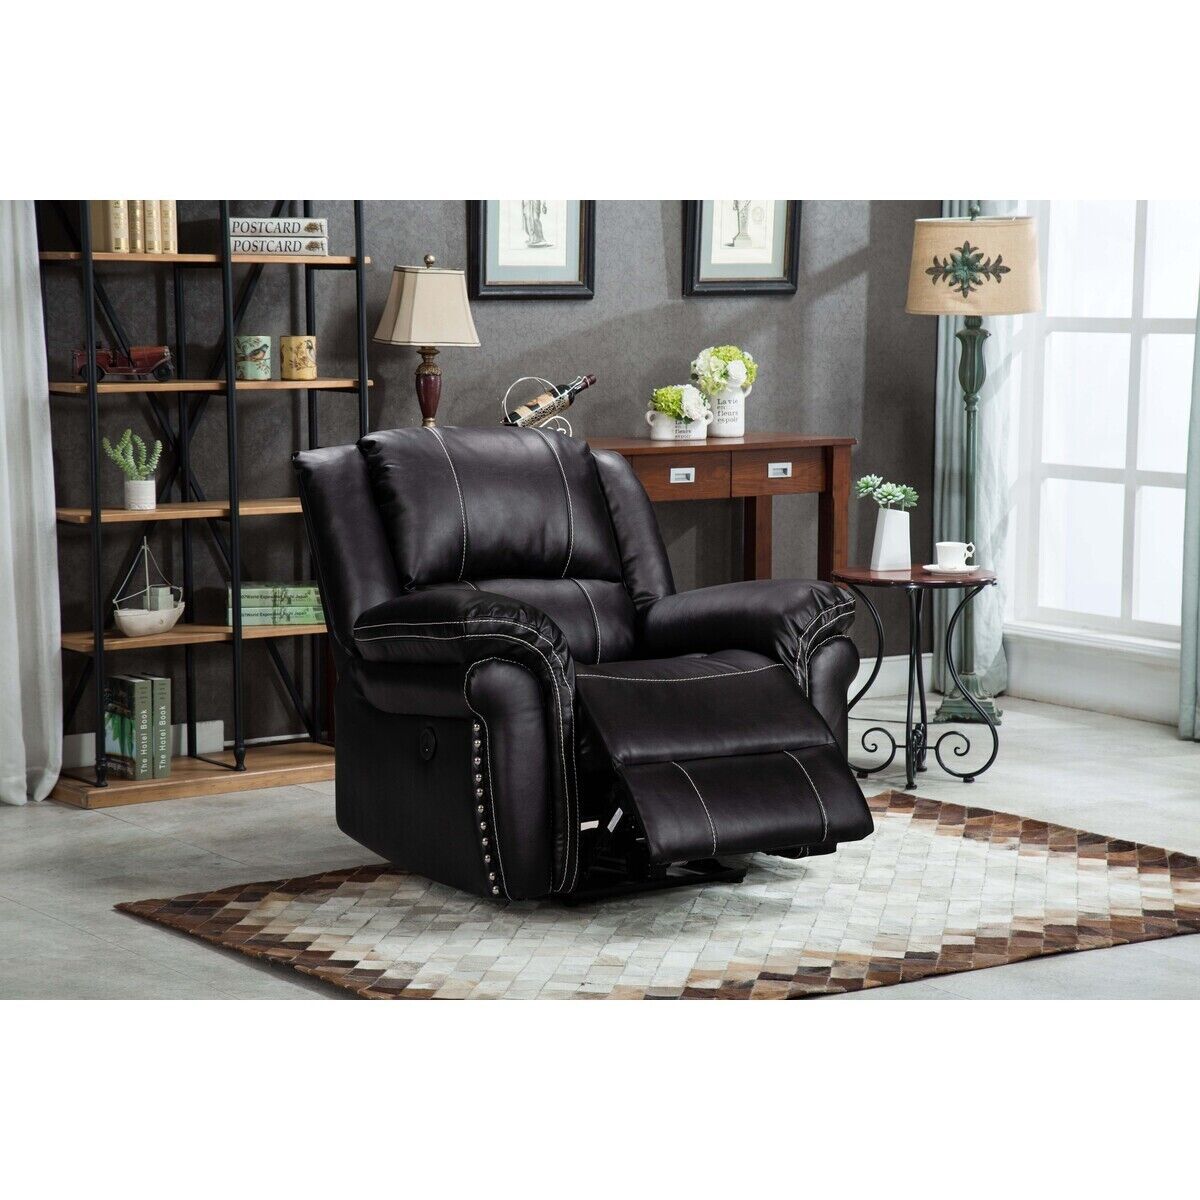 Esofastore PU Leather Power Recliner Armchair with USB Port and Plush Pillow Back Cushion, Living Room Sofa Chair, Adjustable, Black